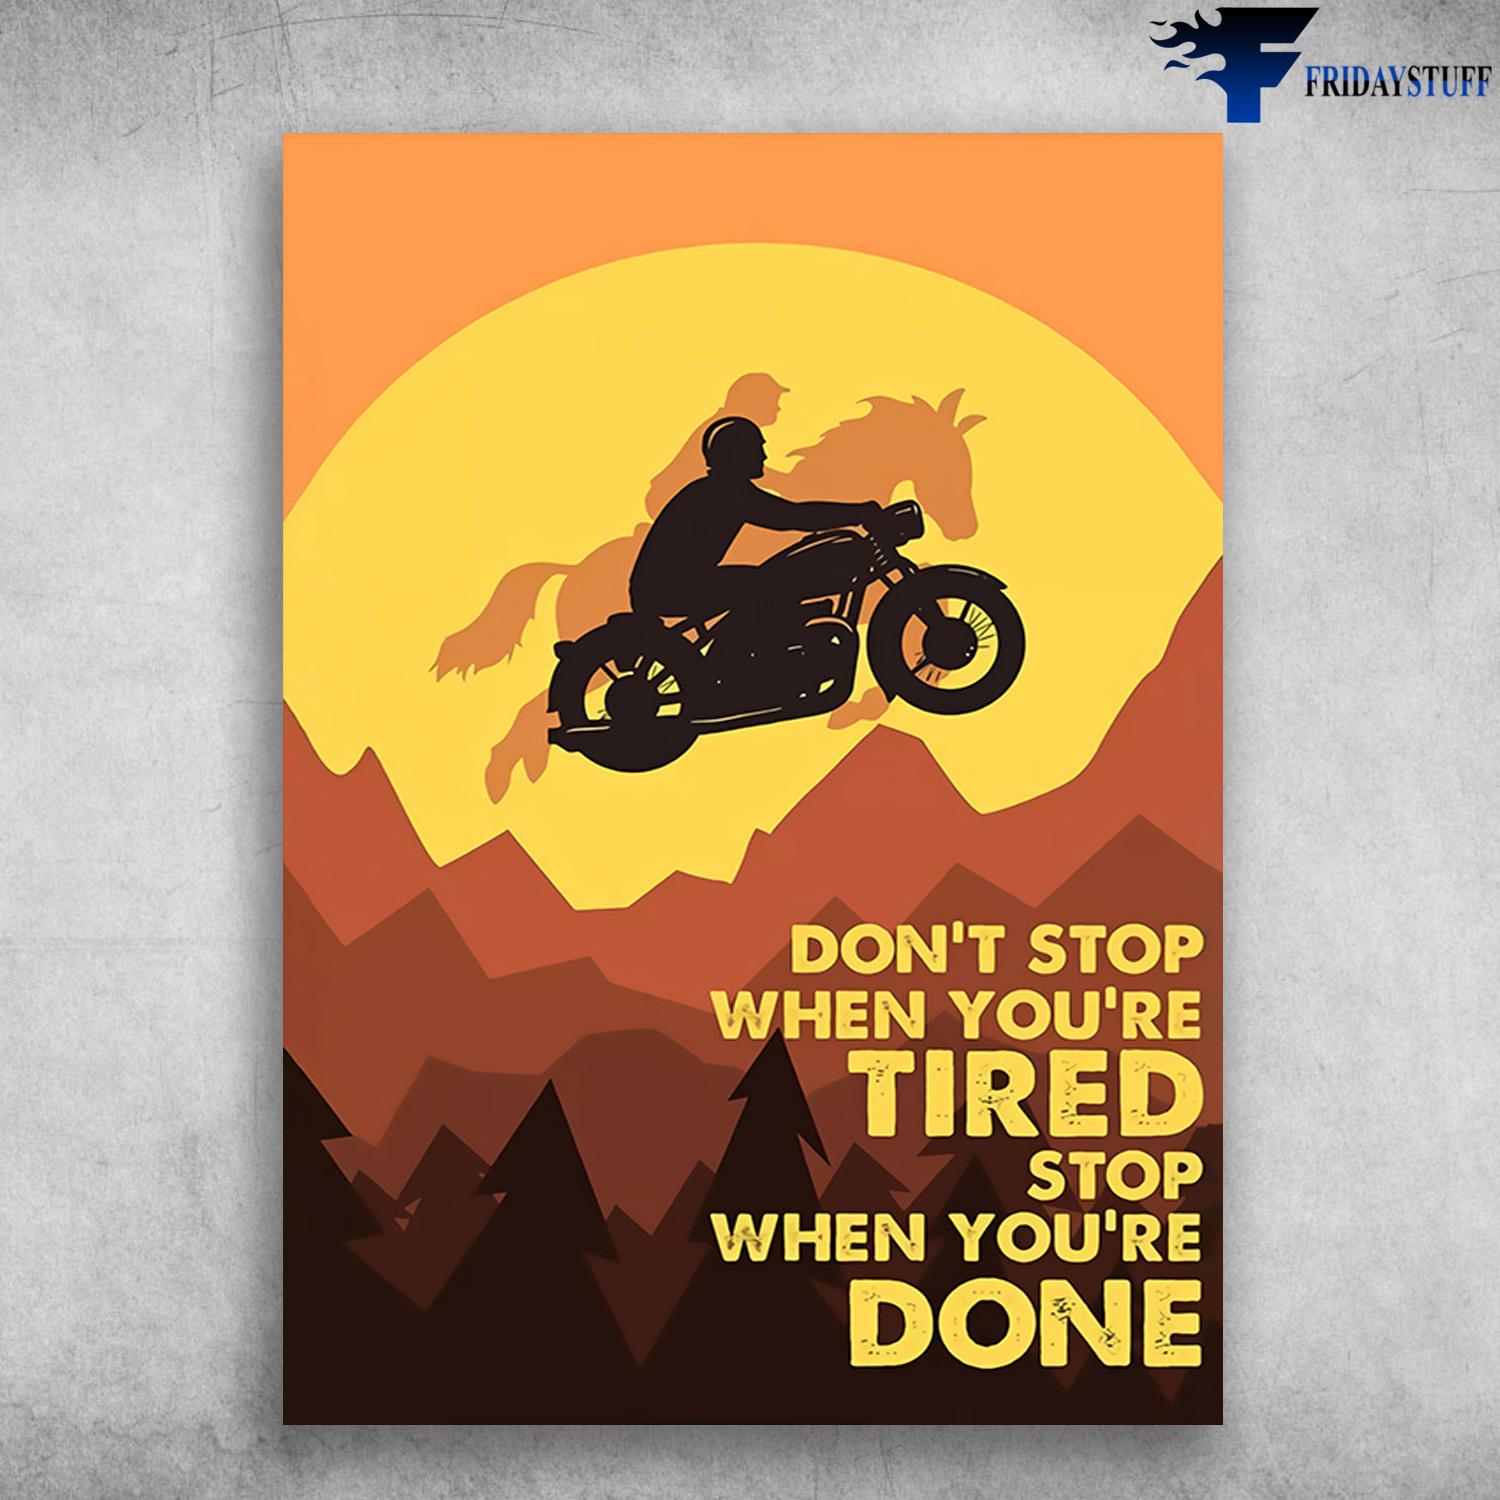 Motorcycle Poster, Riding Horse - Don't Stop When You Tired, Stop When You're DOne